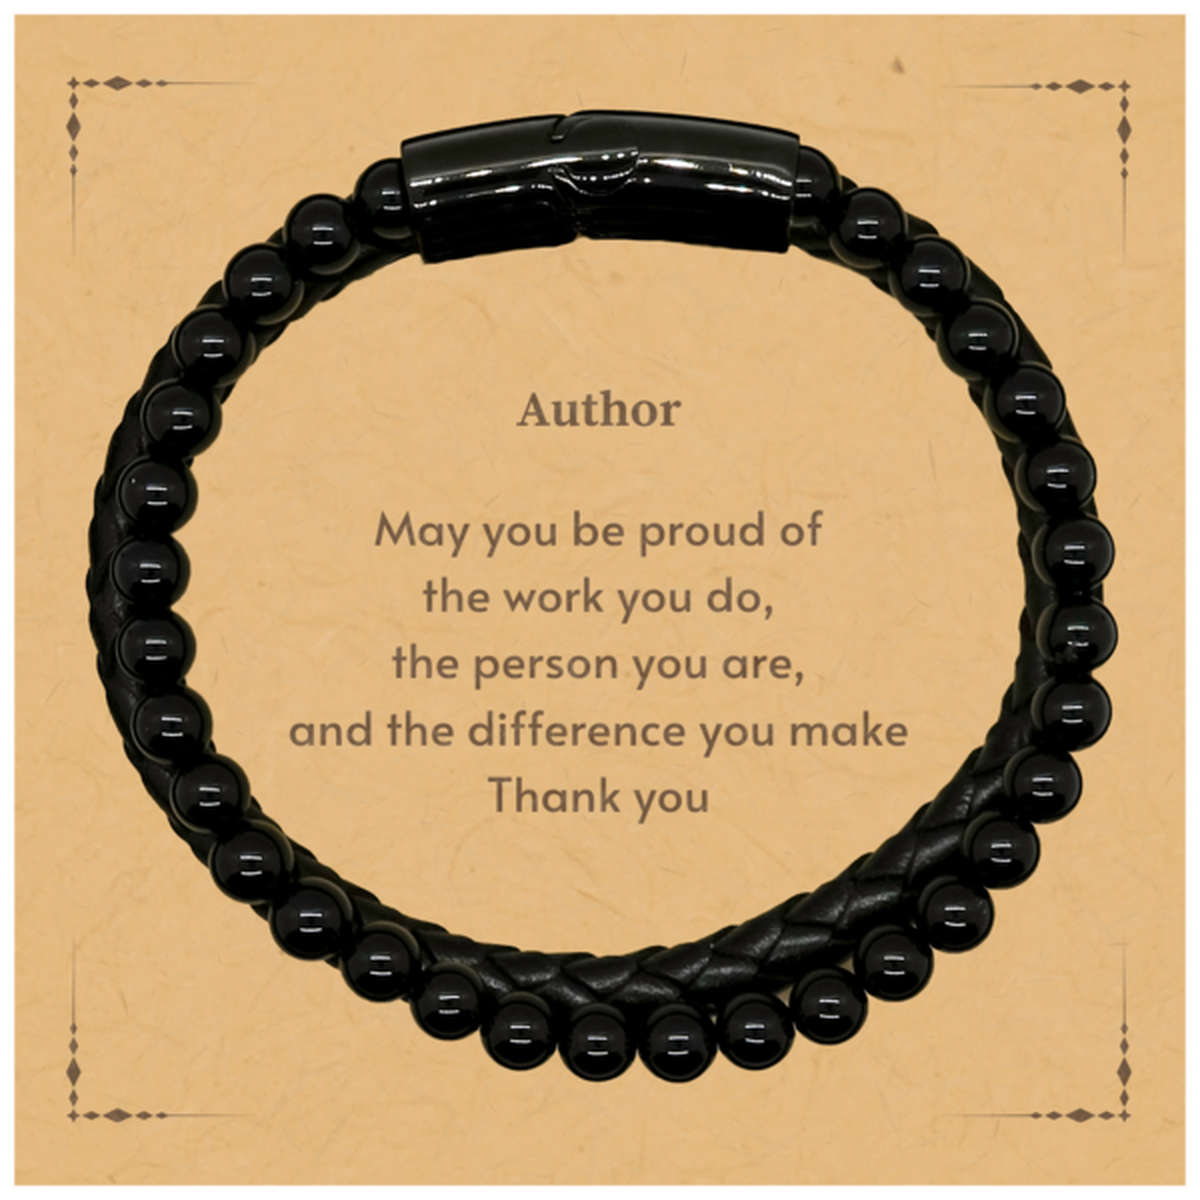 Heartwarming Stone Leather Bracelets Retirement Coworkers Gifts for Author, Author May You be proud of the work you do, the person you are Gifts for Boss Men Women Friends